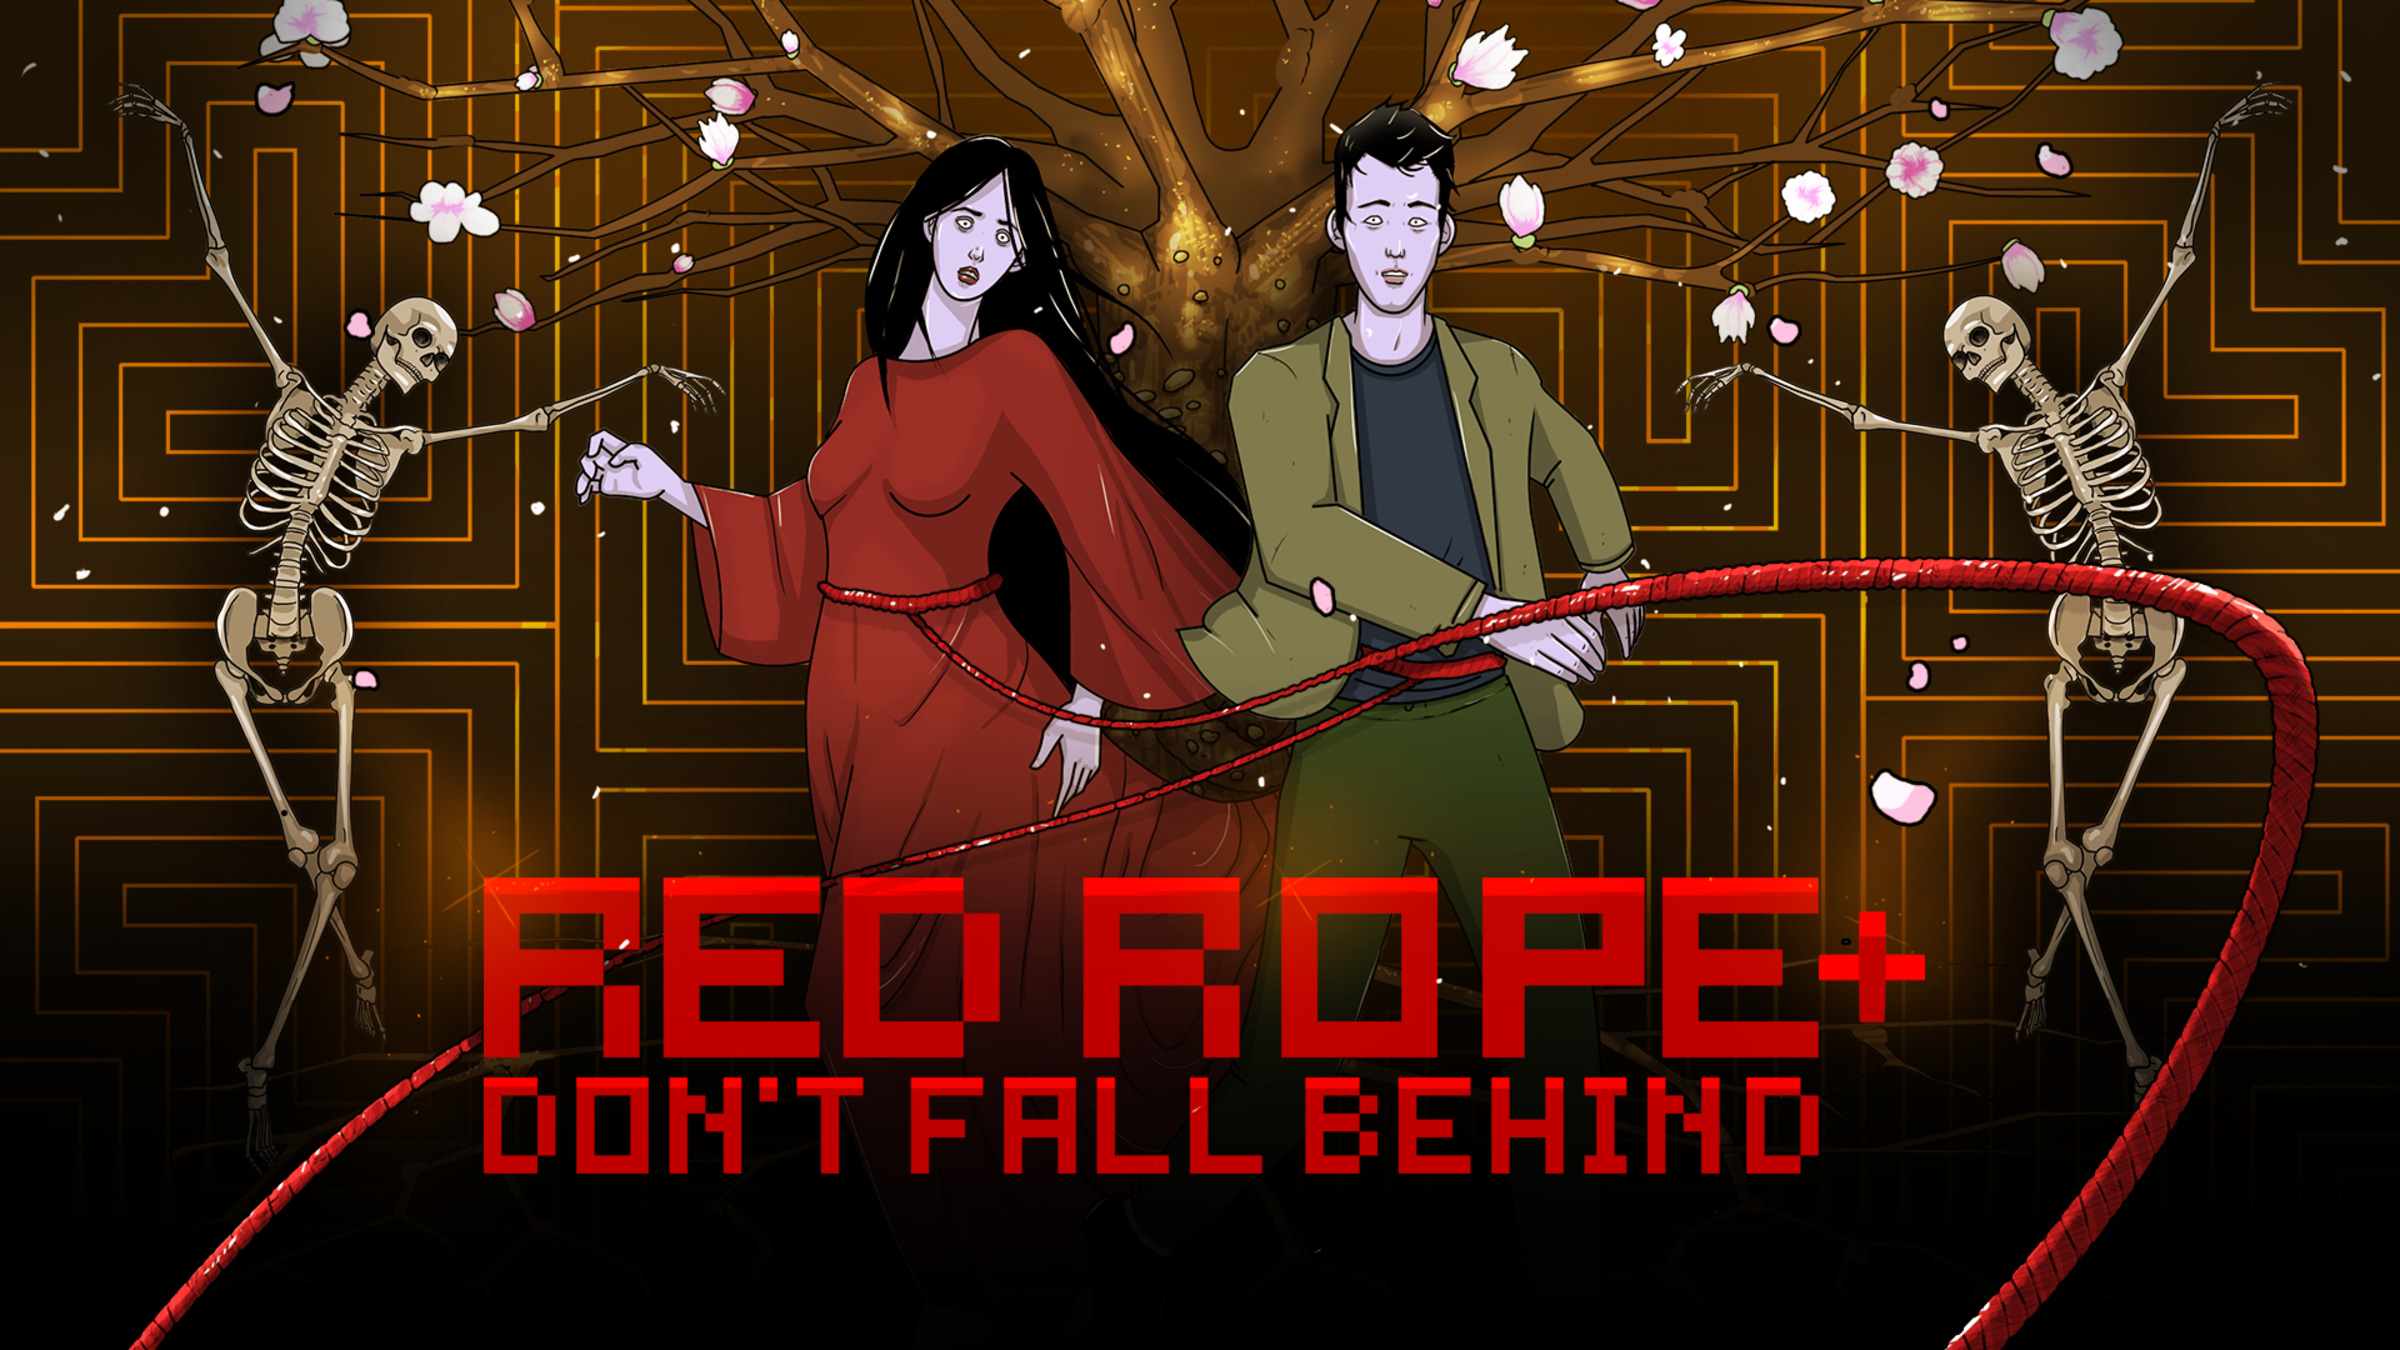 Red Rope: Don't Fall Behind +